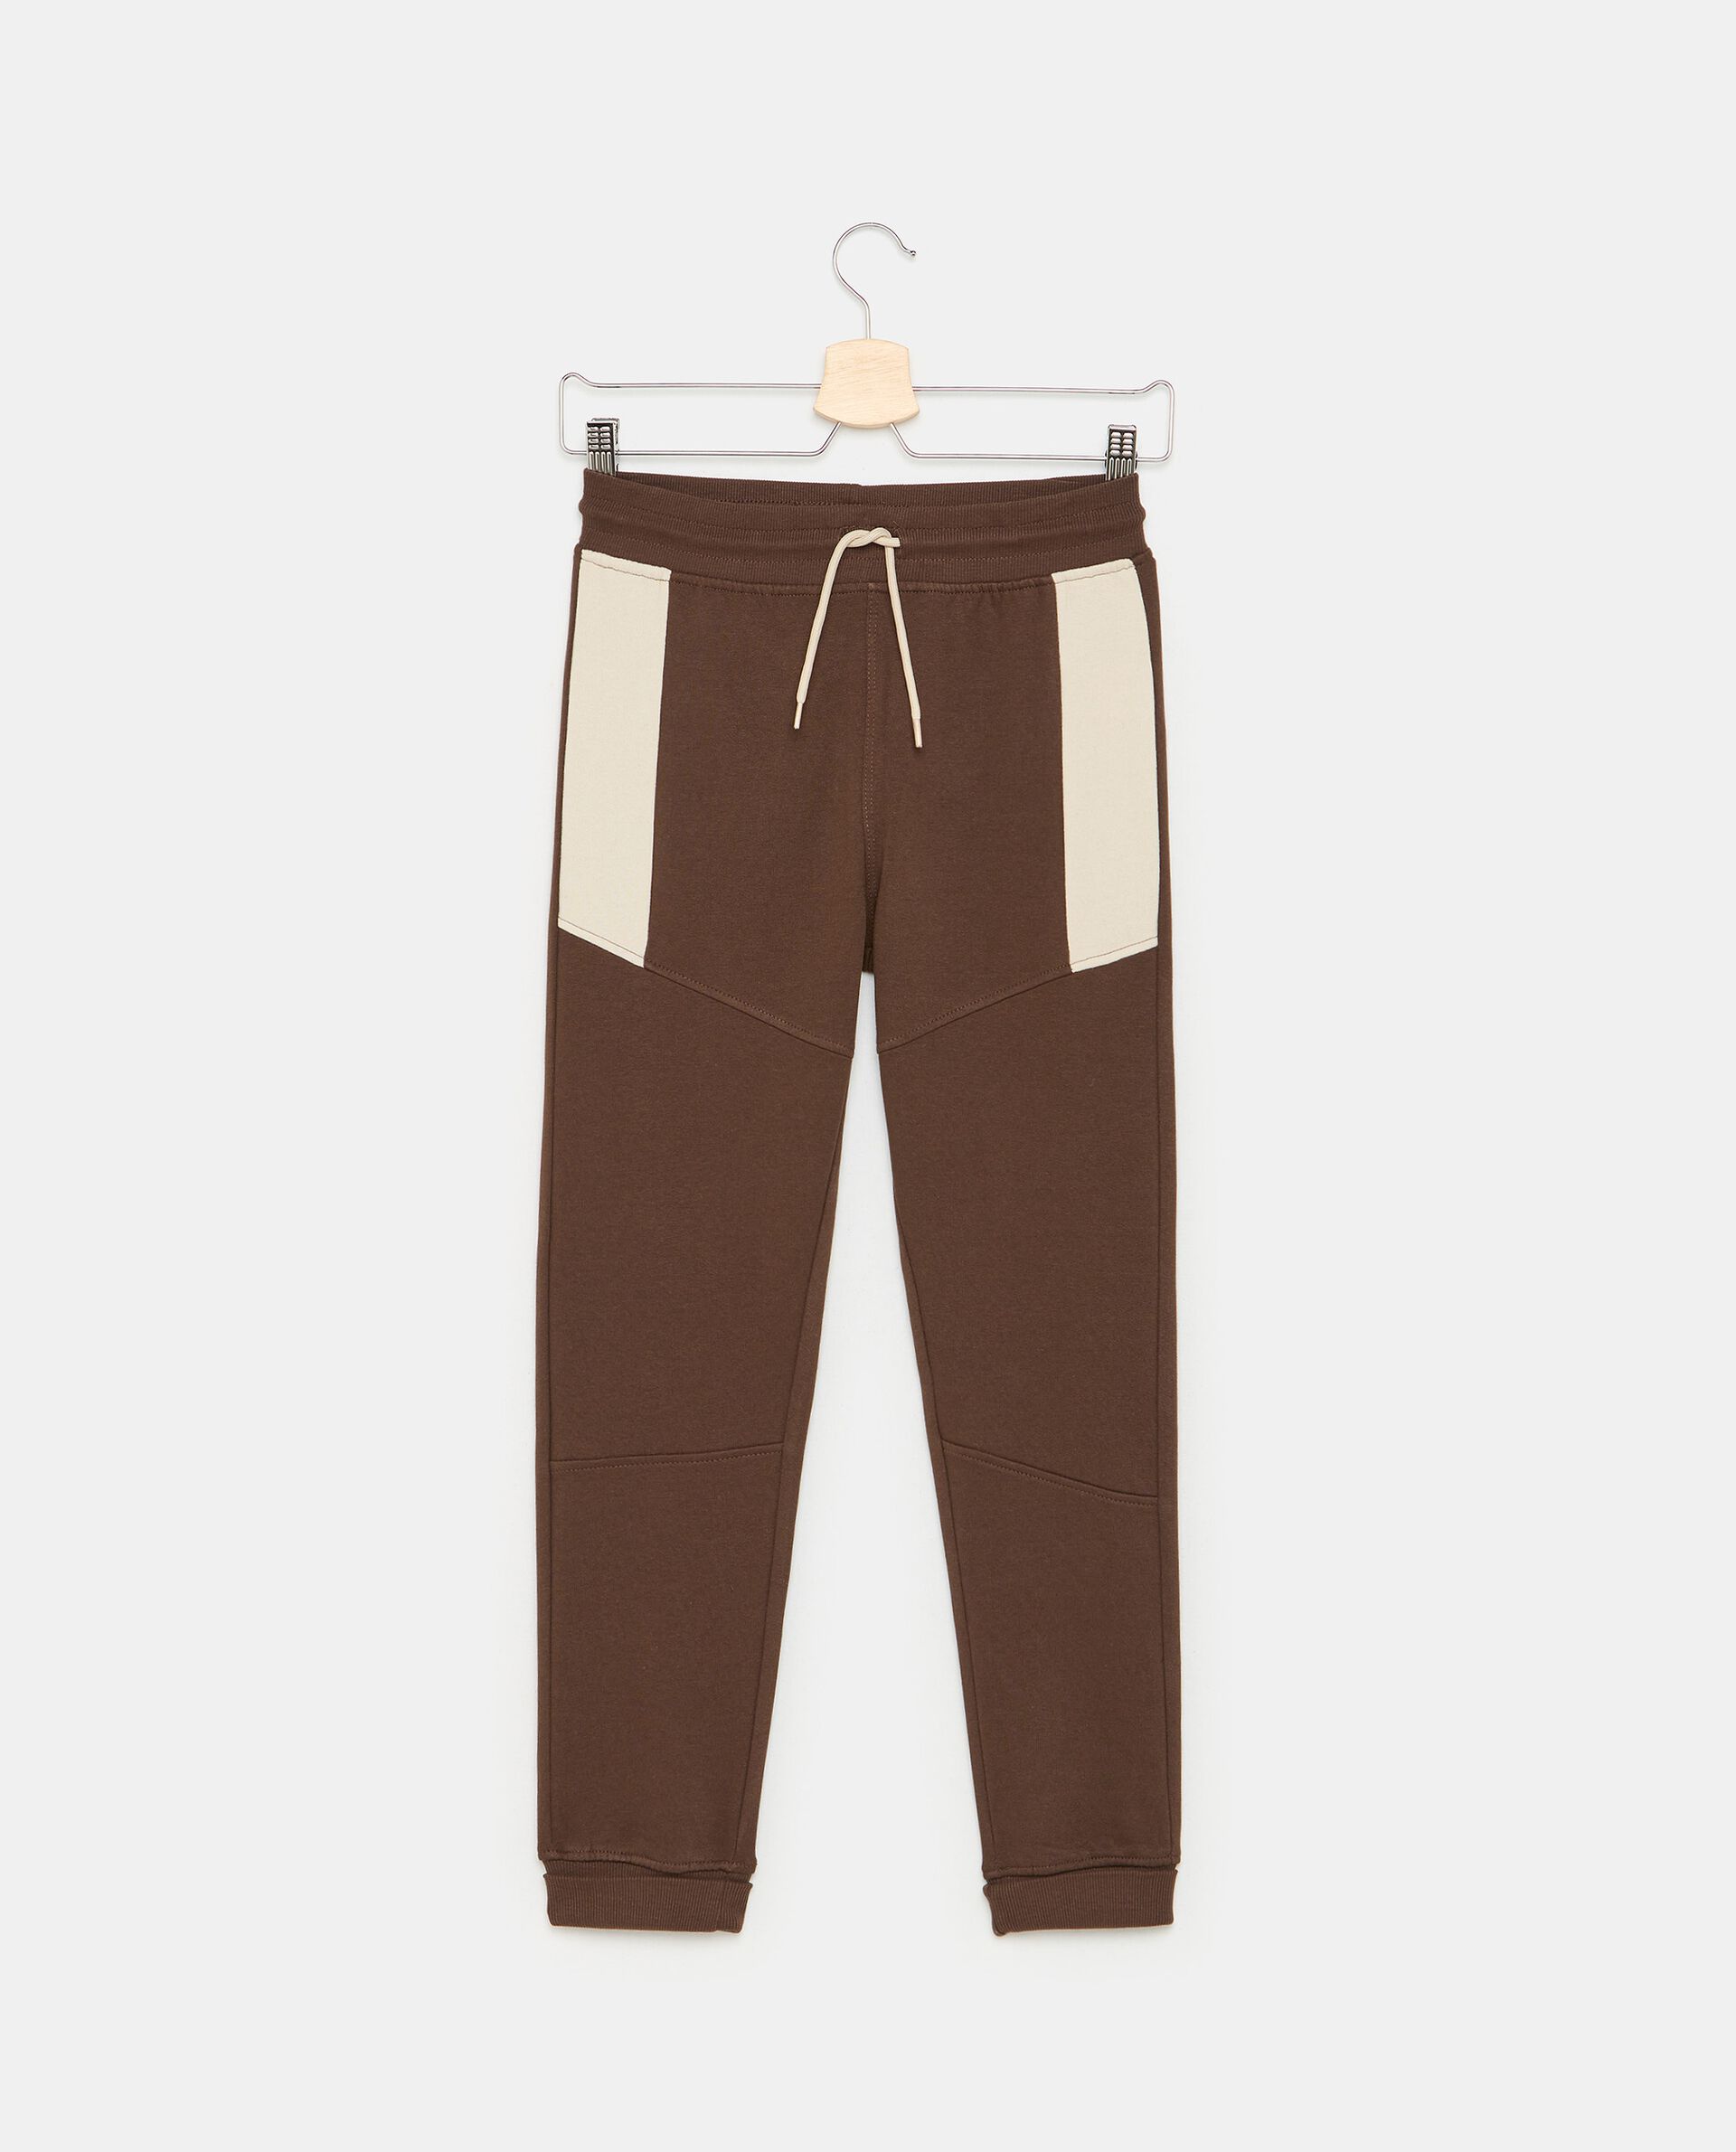 8-12YEARS BOYS' TROUSERS